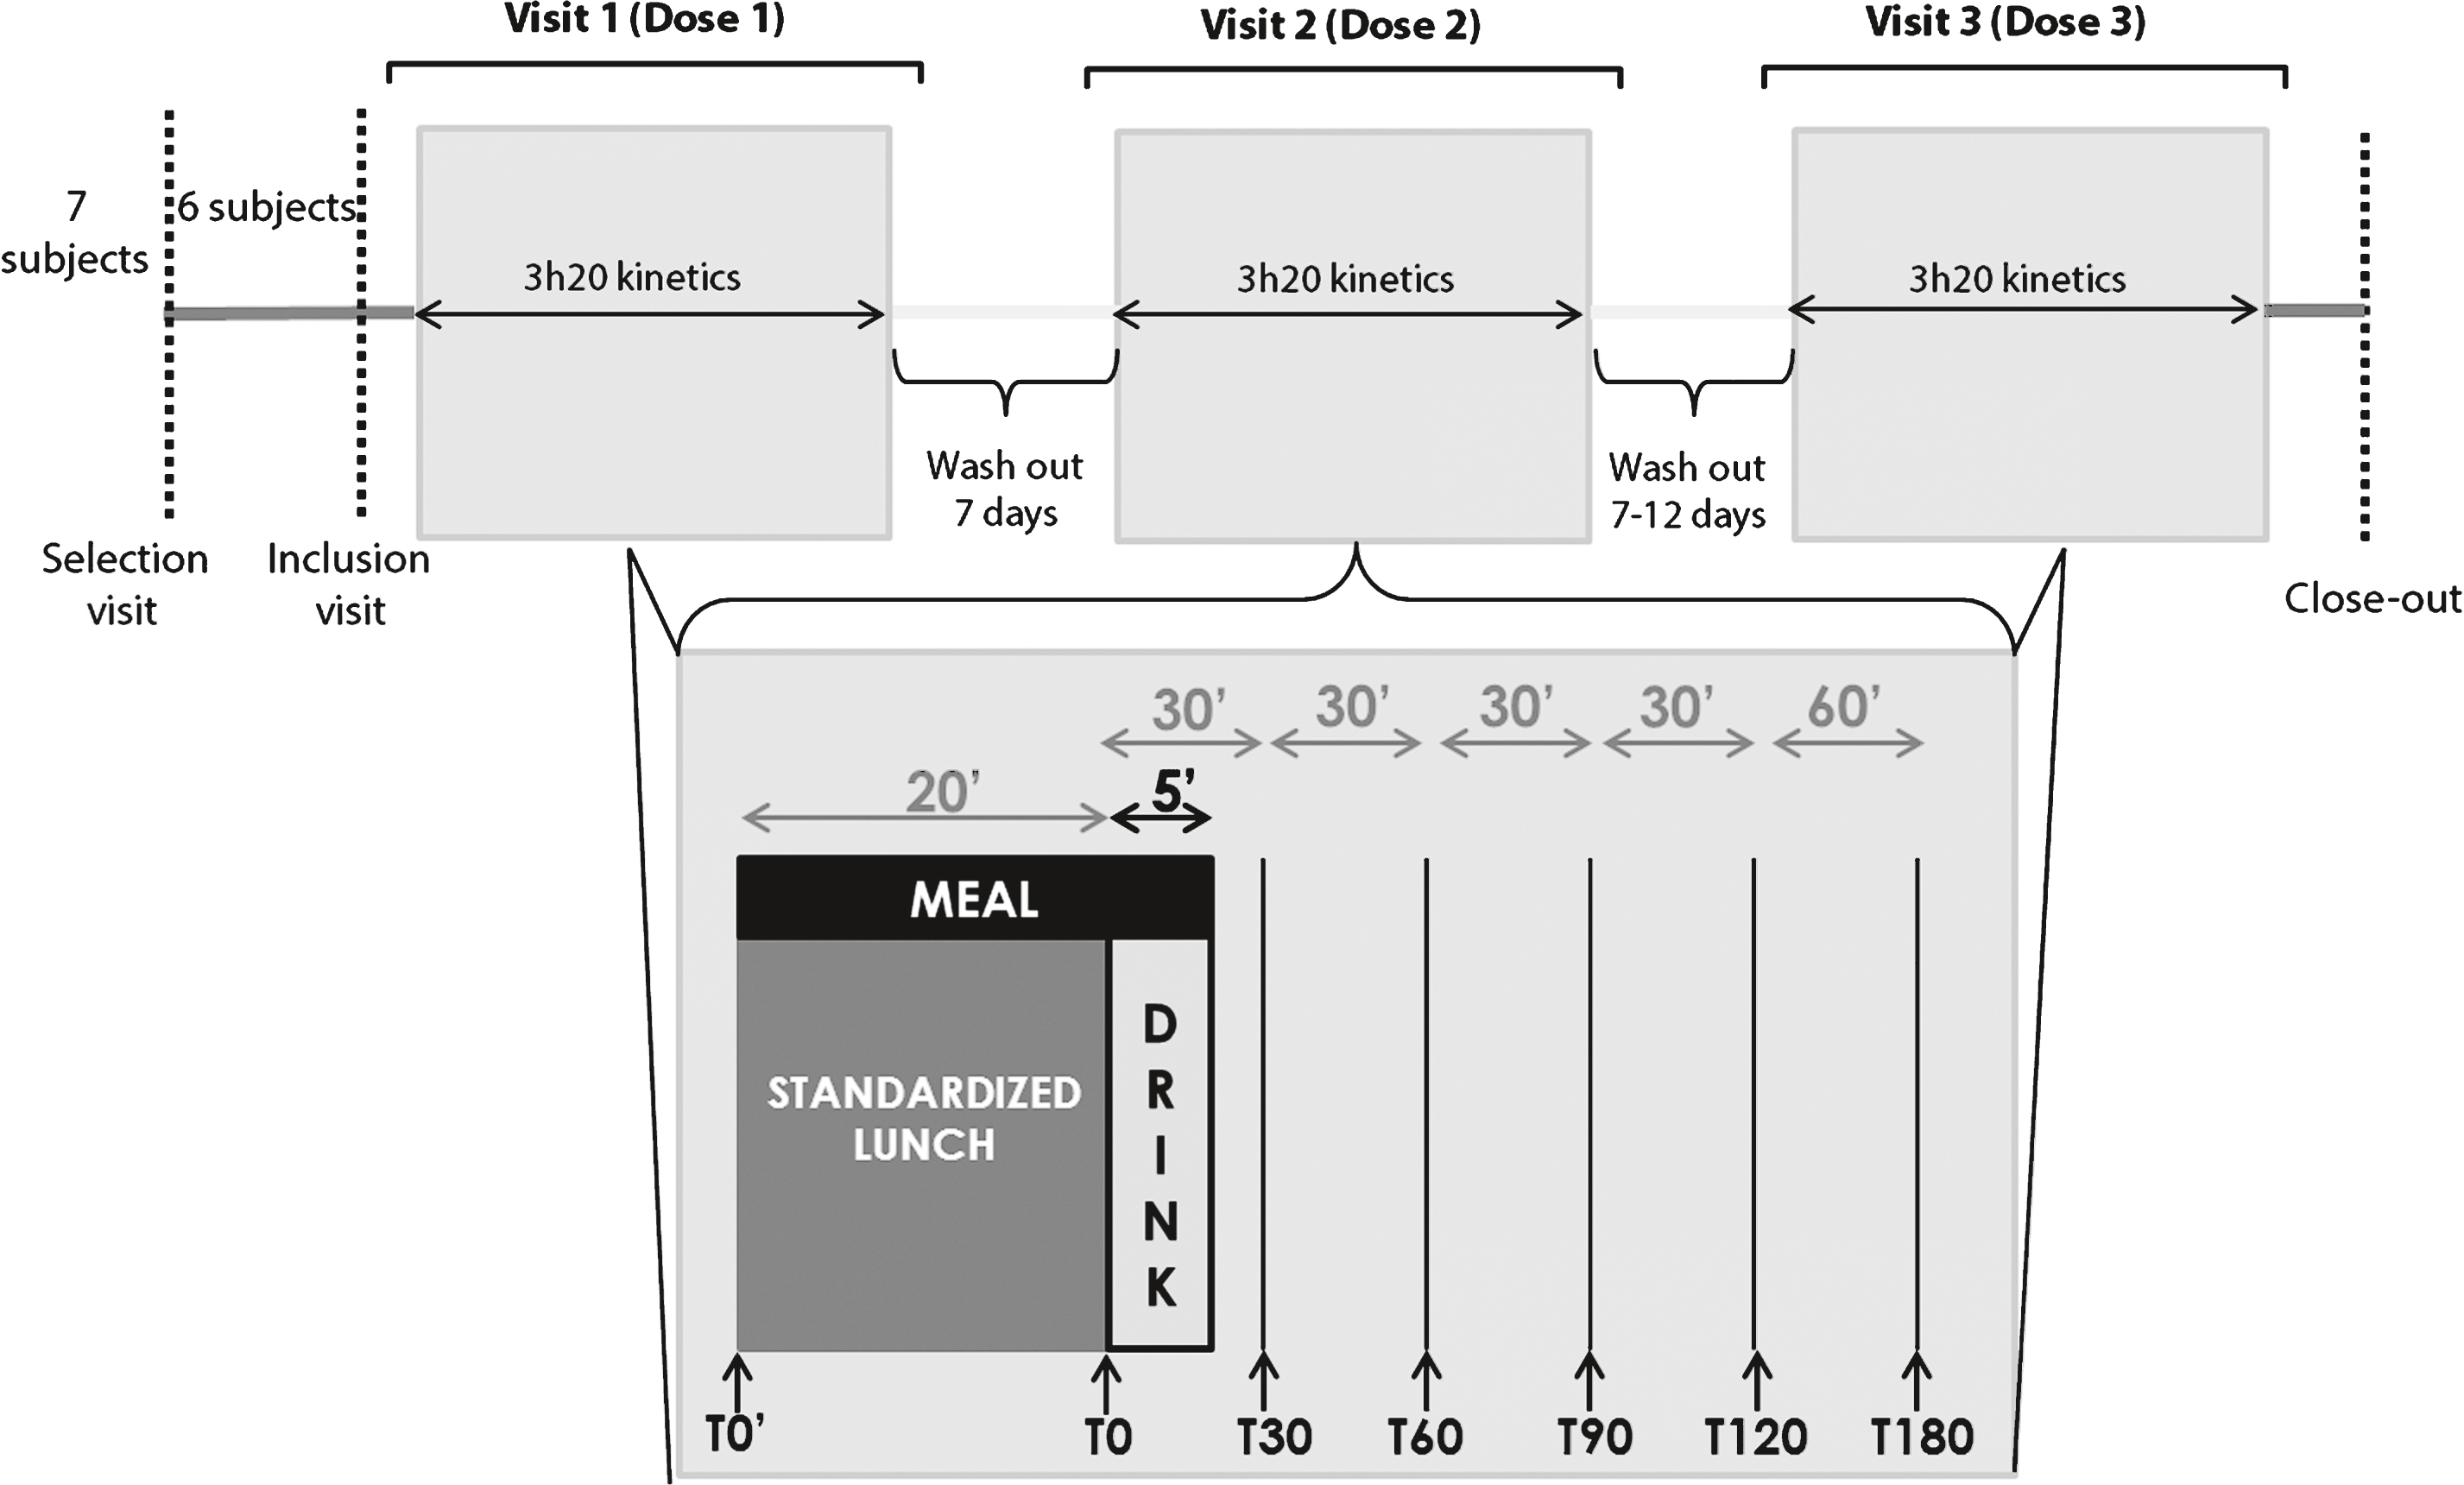 The study was based on a crossover design. During each visit of the study, the six men consumed a standardized lunch supplemented with a beverage containing either 0 g, or 5 g or 8.2 g of soluble milk proteins (randomly assigned). Blood samples were collected before and after lunch consumption (during a 3h20 period).